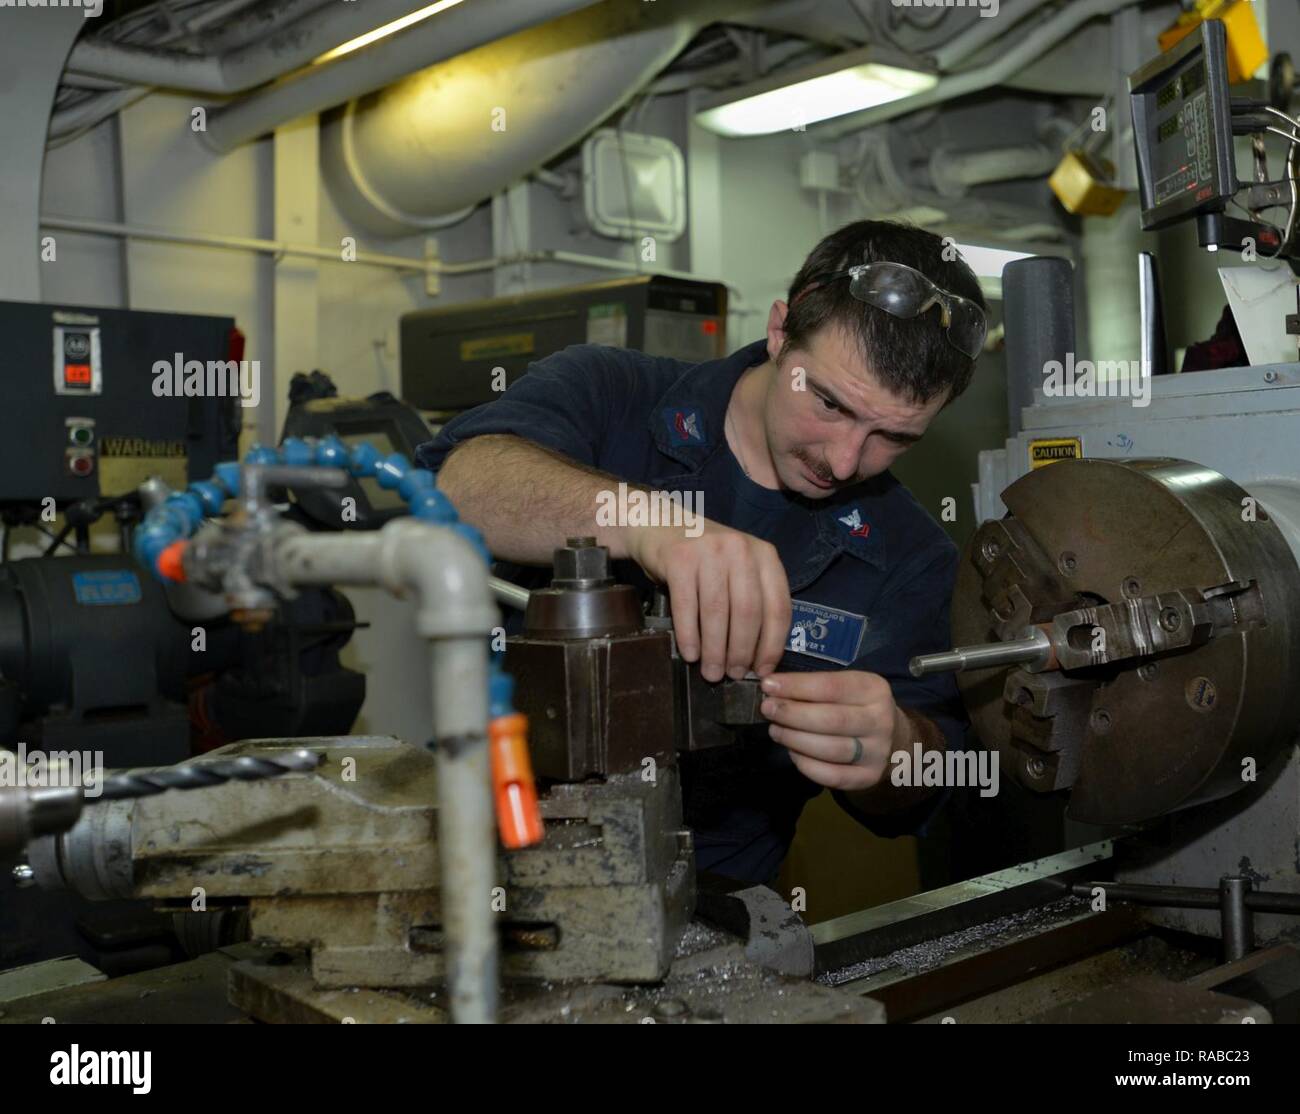 ATLANTIC OCEAN (Jan. 13, 2017) – Machinery Repairman 2nd Class Tim Grover, a native of Hillsboro, Oregon, removes a bolt for cleaning from the cutter in the Machine Shop aboard the Wasp-class multipurpose amphibious assault ship USS Bataan (LHD 5). Bataan is underway conducting Composite Training Unit Exercise (COMPTUEX) with the Bataan Amphibious Ready Group in preparation for an upcoming deployment. Stock Photo